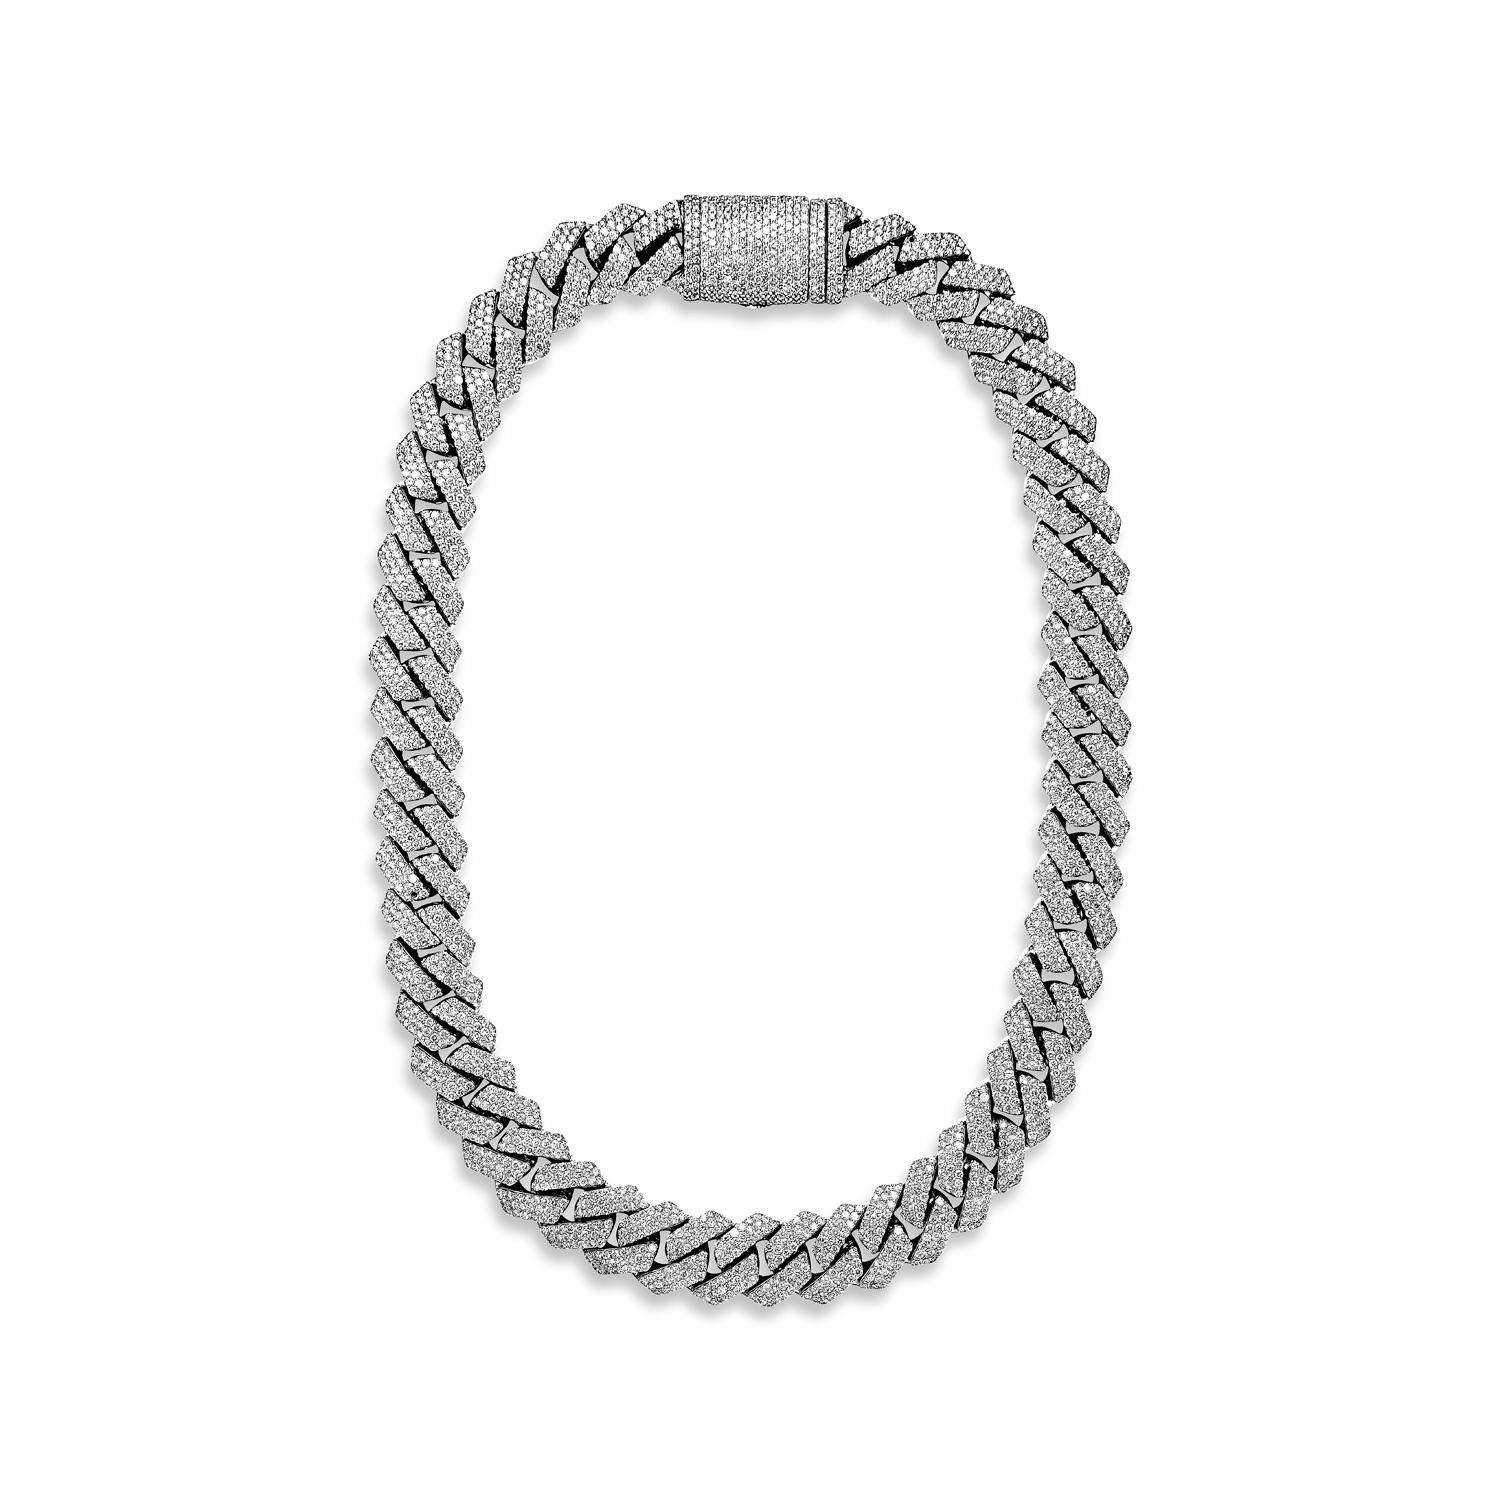 Diamond ICED OUT CUBAN CHAIN For Male, a luxurious and one-of-a-kind piece of jewelry. This stunning diamond is mined from the center of the earth, making it extremely rare and valuable. It weighs an impressive 58.71 Carats and is set in a beautiful